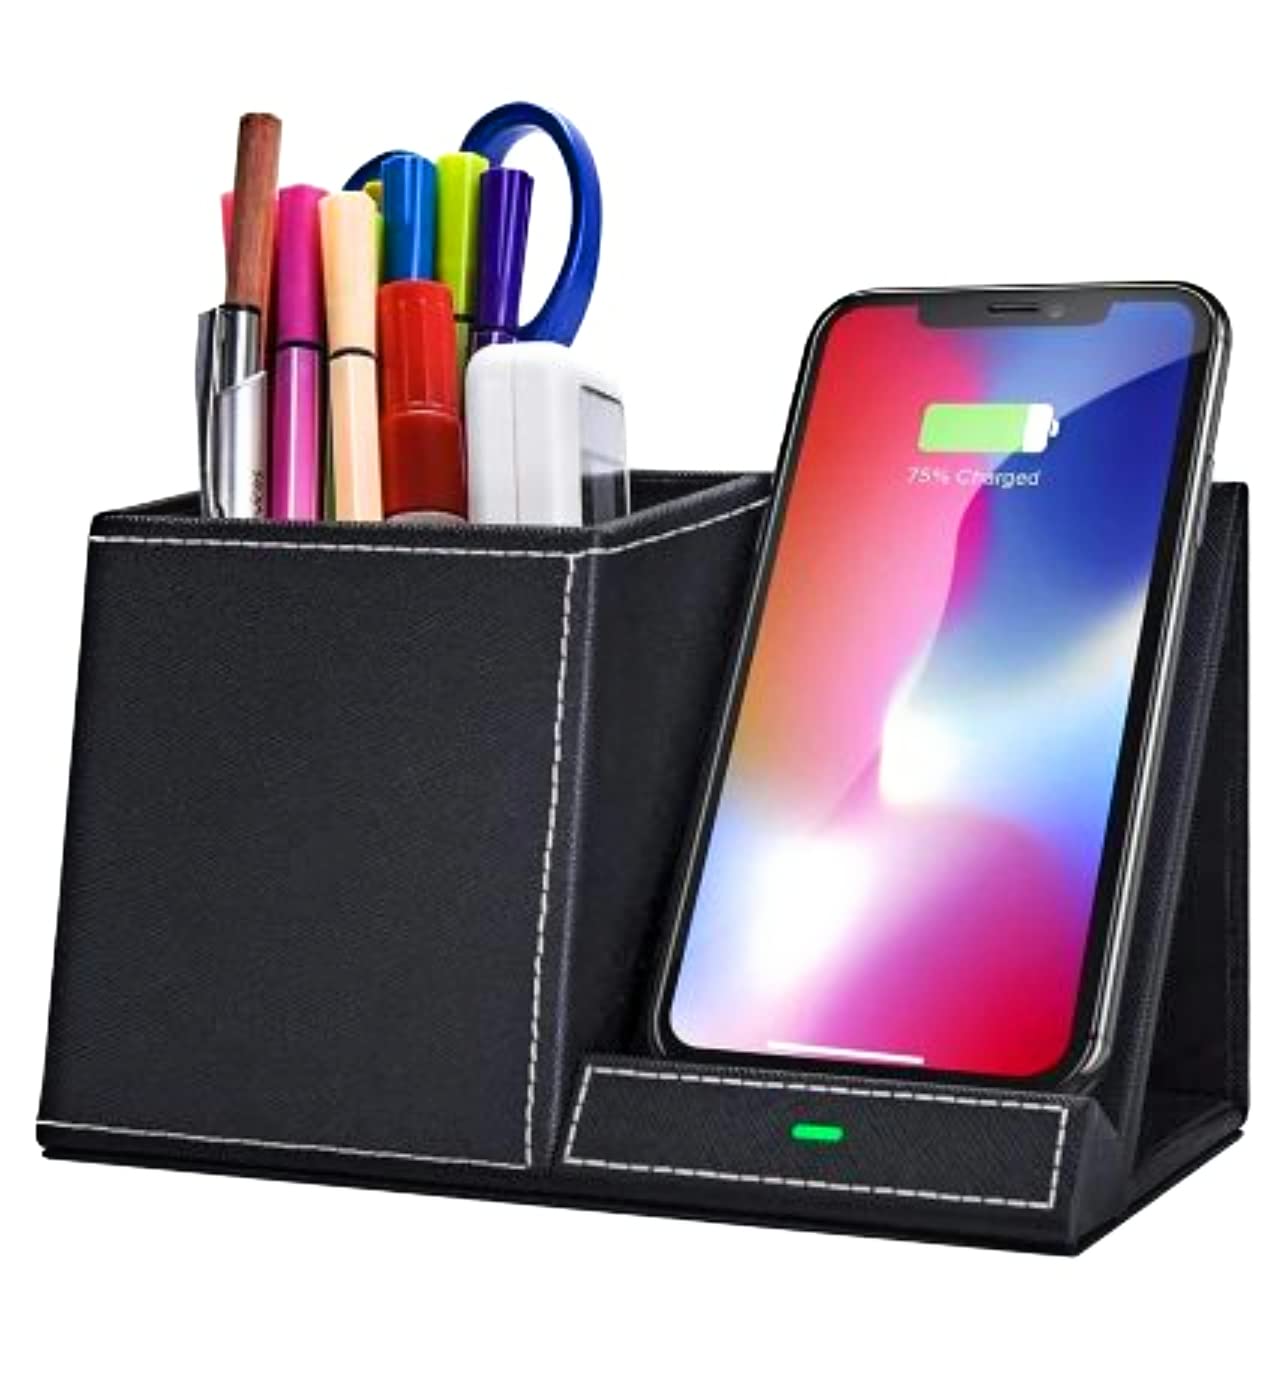 Premium Wireless Charging Stand Pro with Desk Organizer Branzoe Retail Outlet